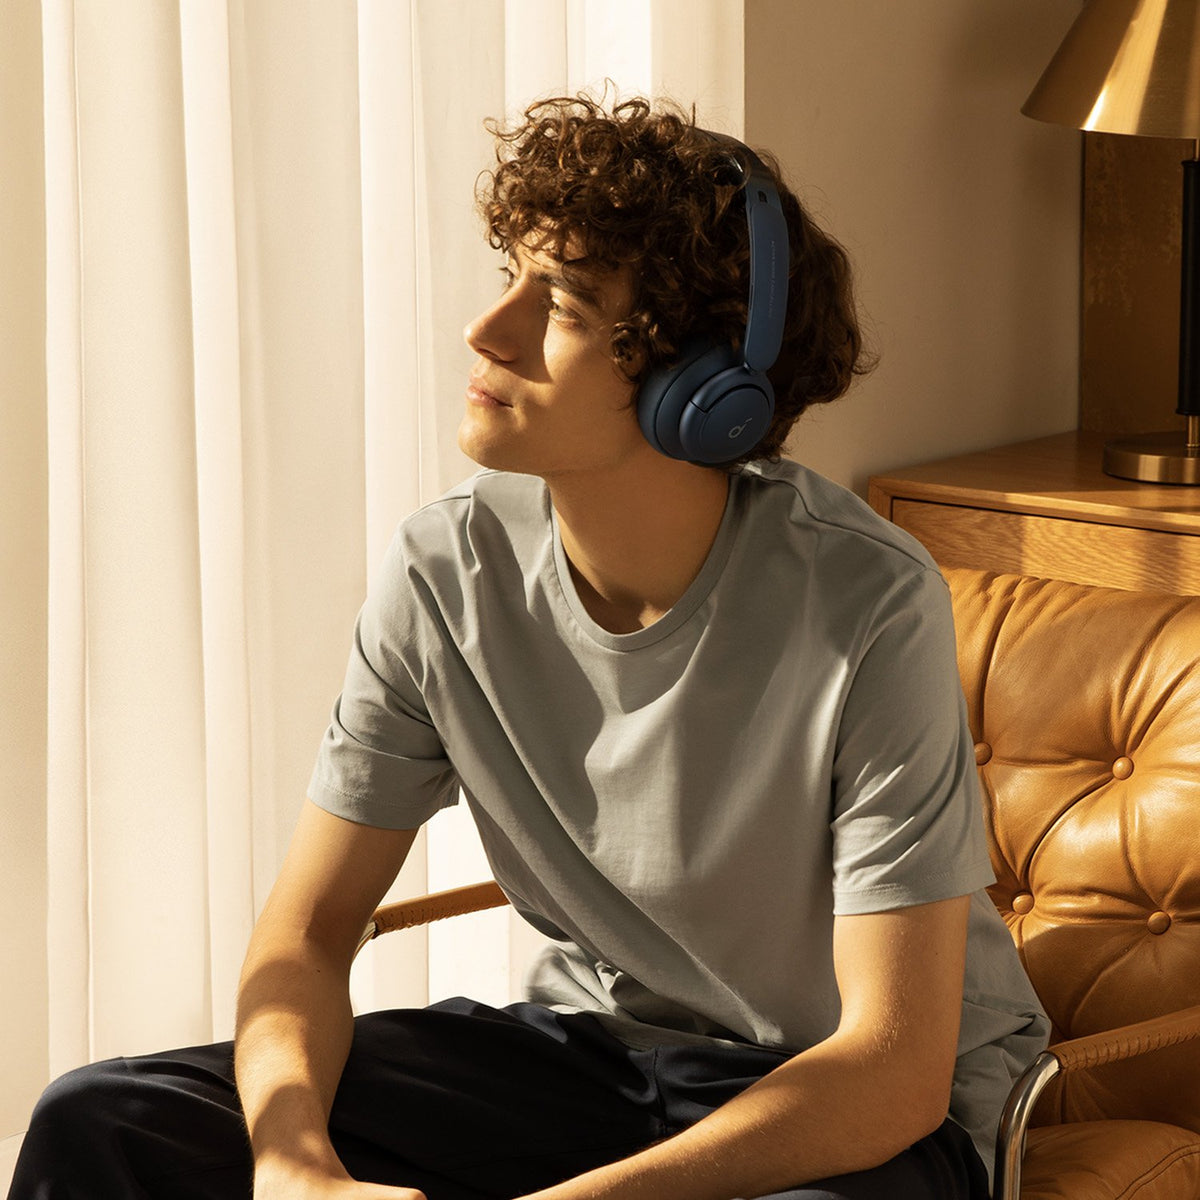 Q35 | Noise-Cancelling Headphones with LDAC